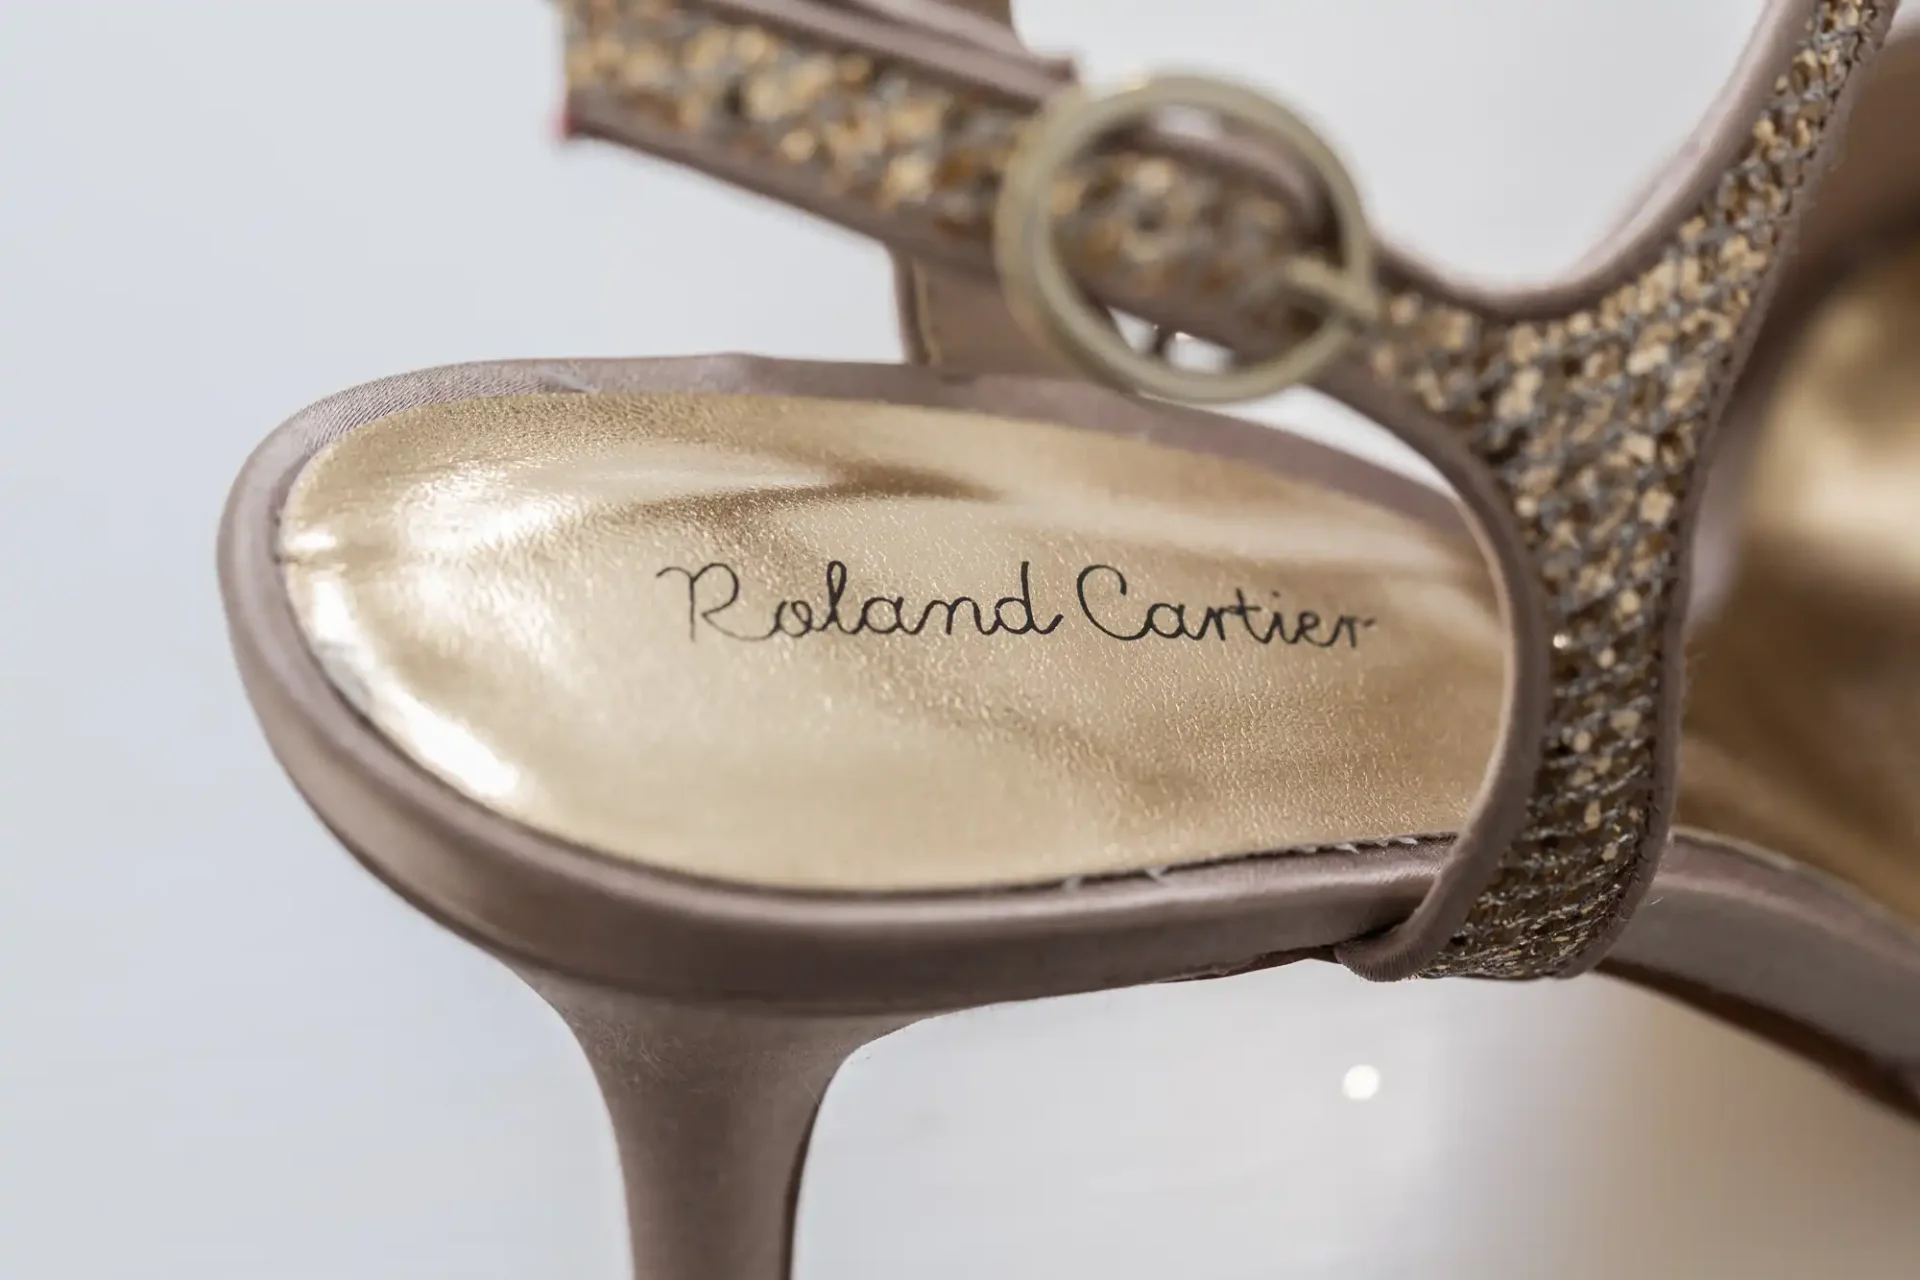 Close-up of a glittery gold high-heeled shoe by roland cartier, focusing on the brand name imprinted on the insole.